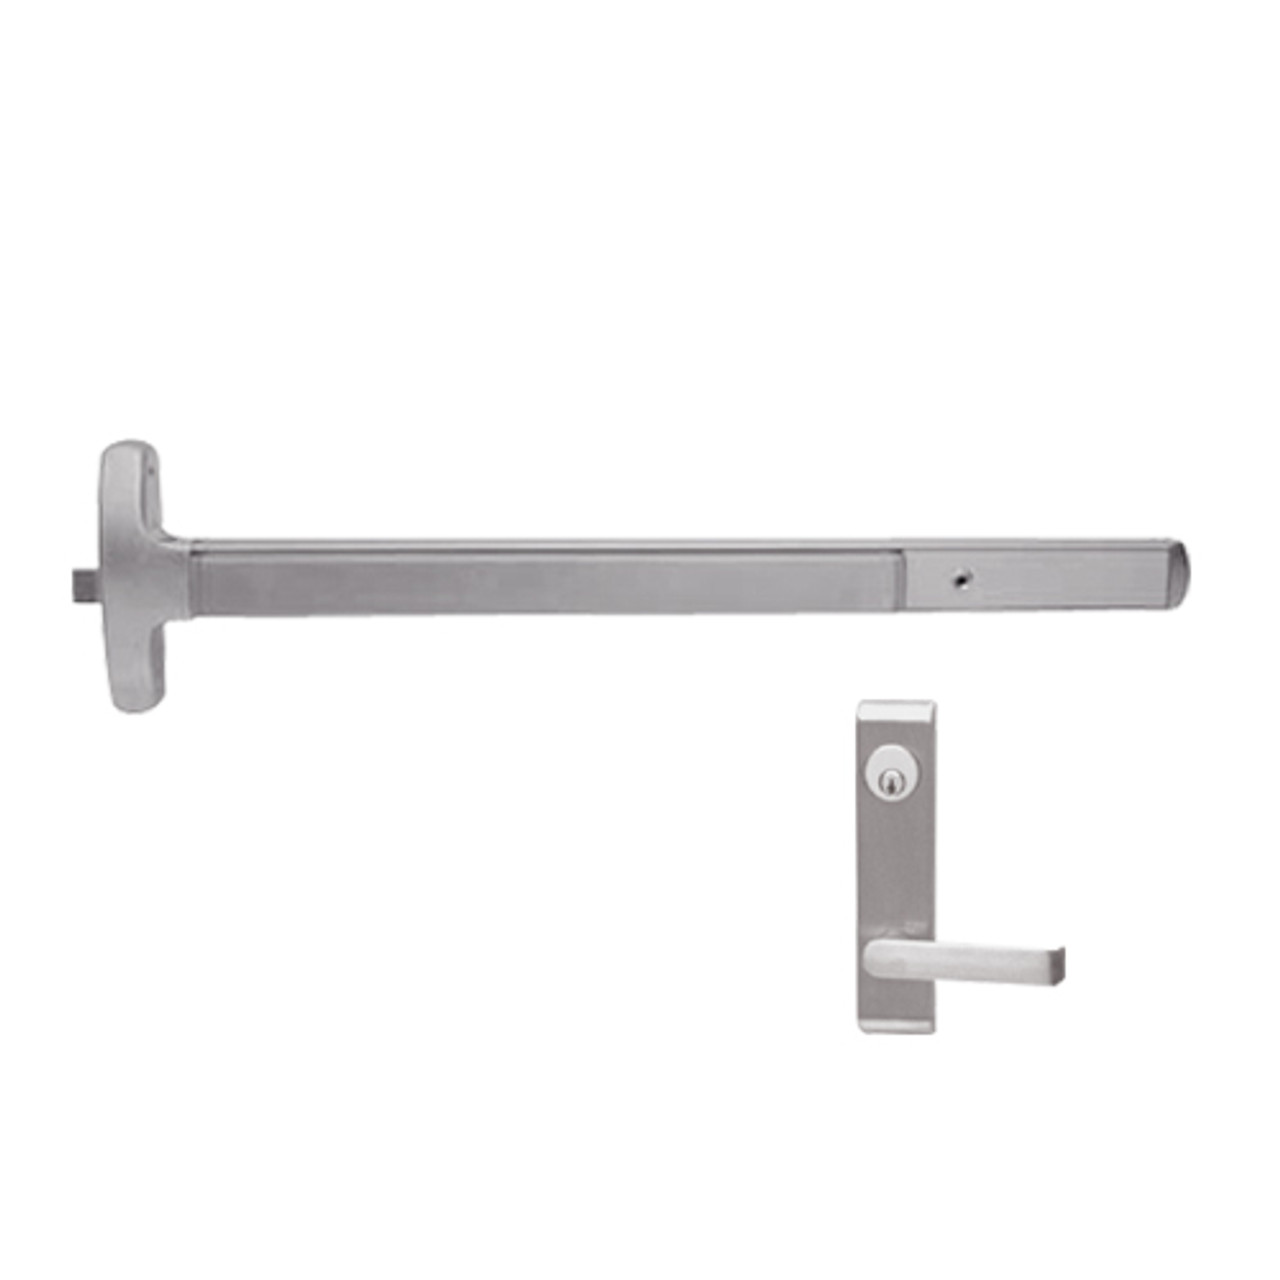 24-R-L-NL-DANE-US32D-4-LHR Falcon Exit Device in Satin Stainless Steel